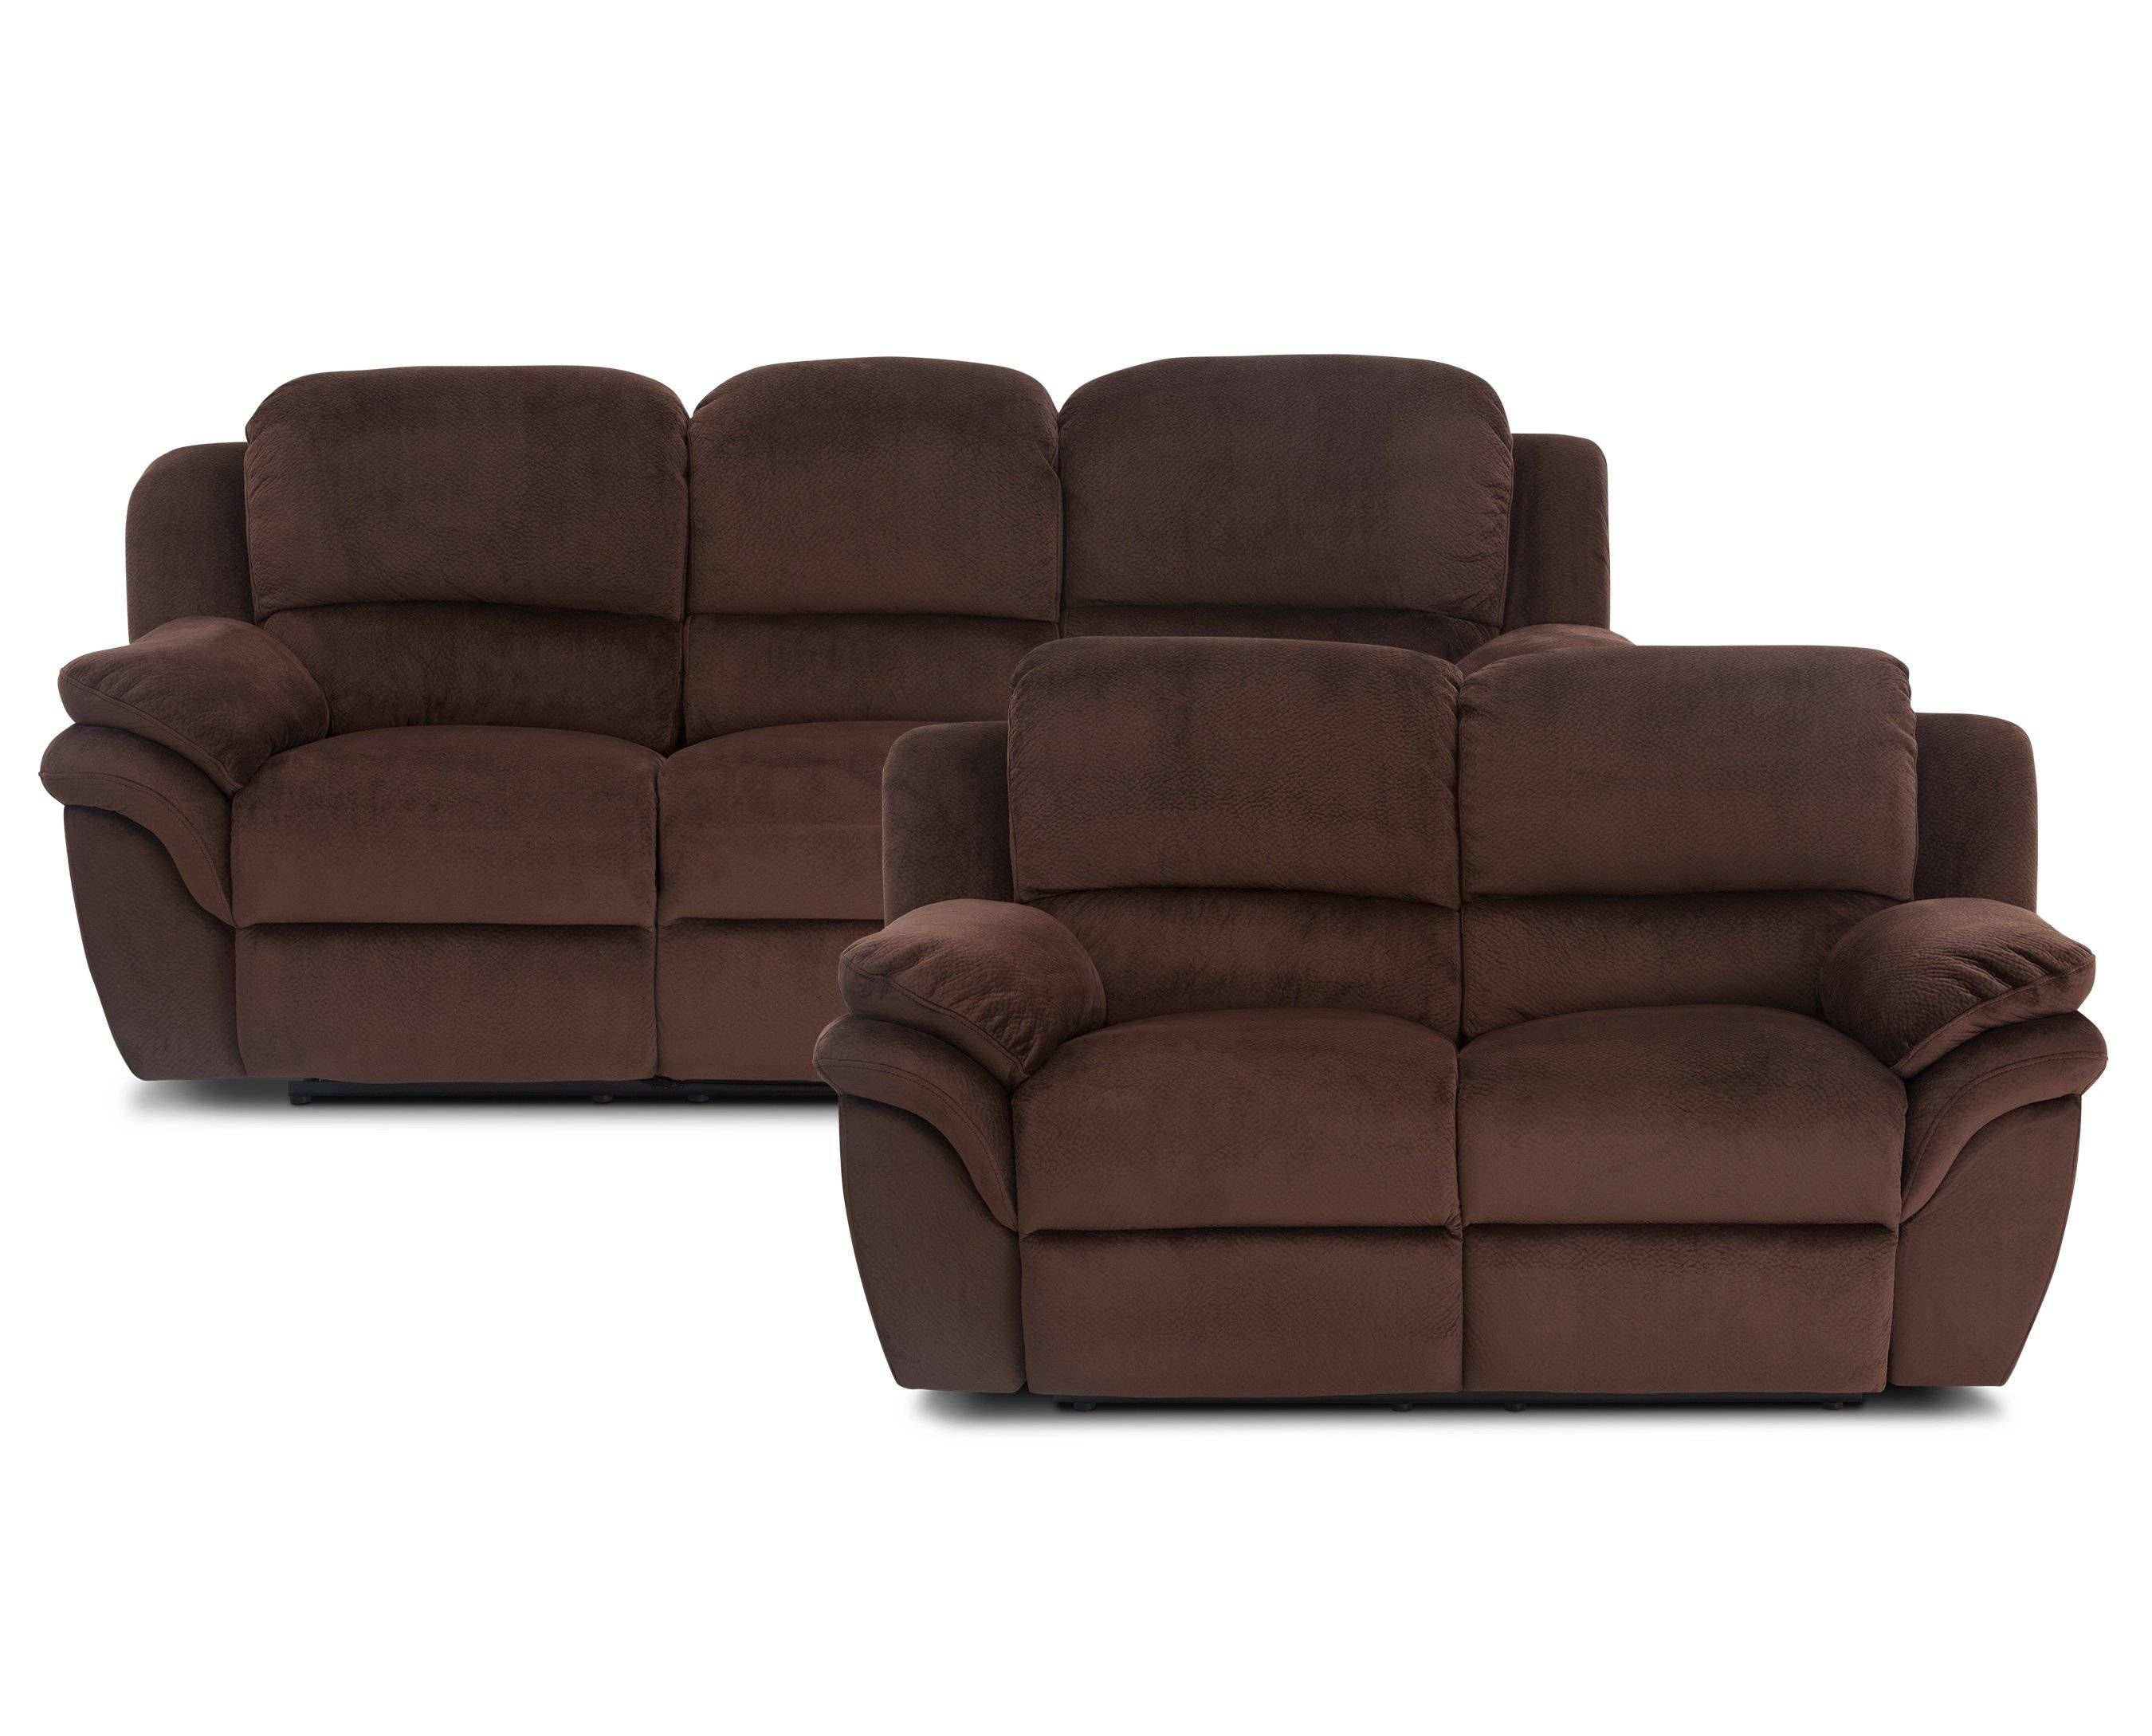 Discount Furniture  Sale & Clearance Selection | Furniture Row Regarding Sofa Mart Chairs (View 28 of 30)